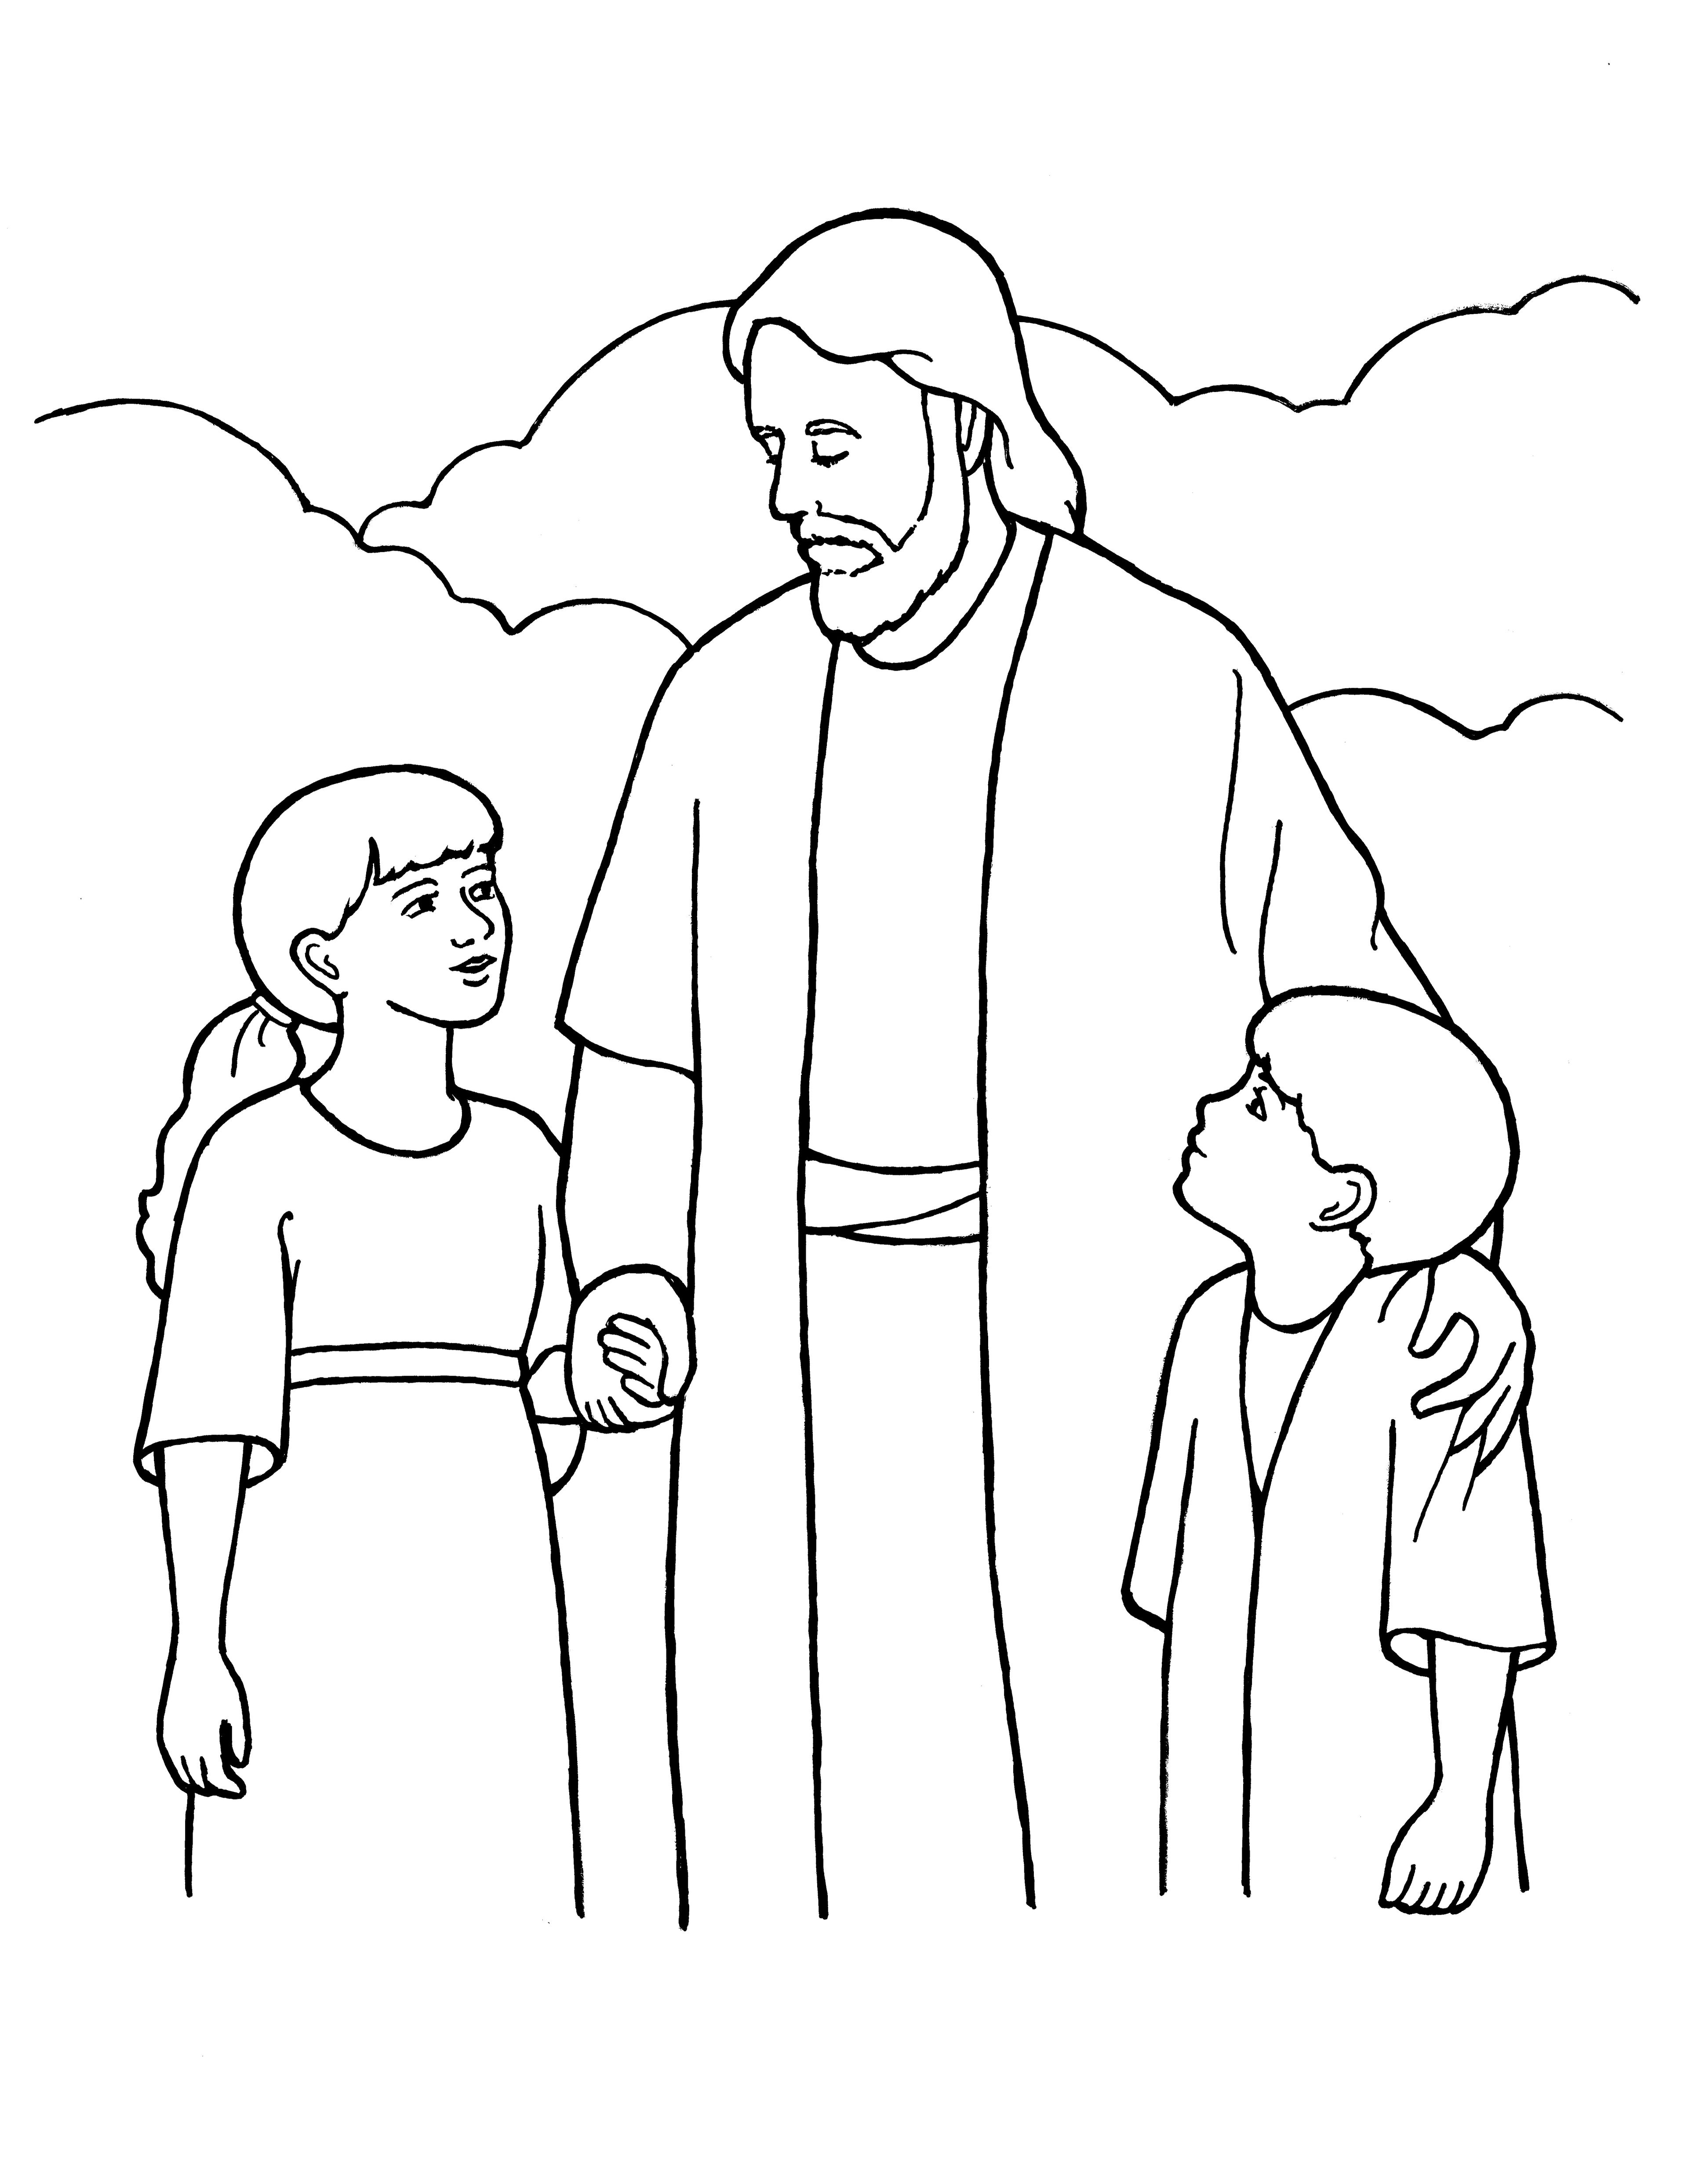 An illustration of Christ with two children, from the nursery manual Behold Your Little Ones (2008), page 15.